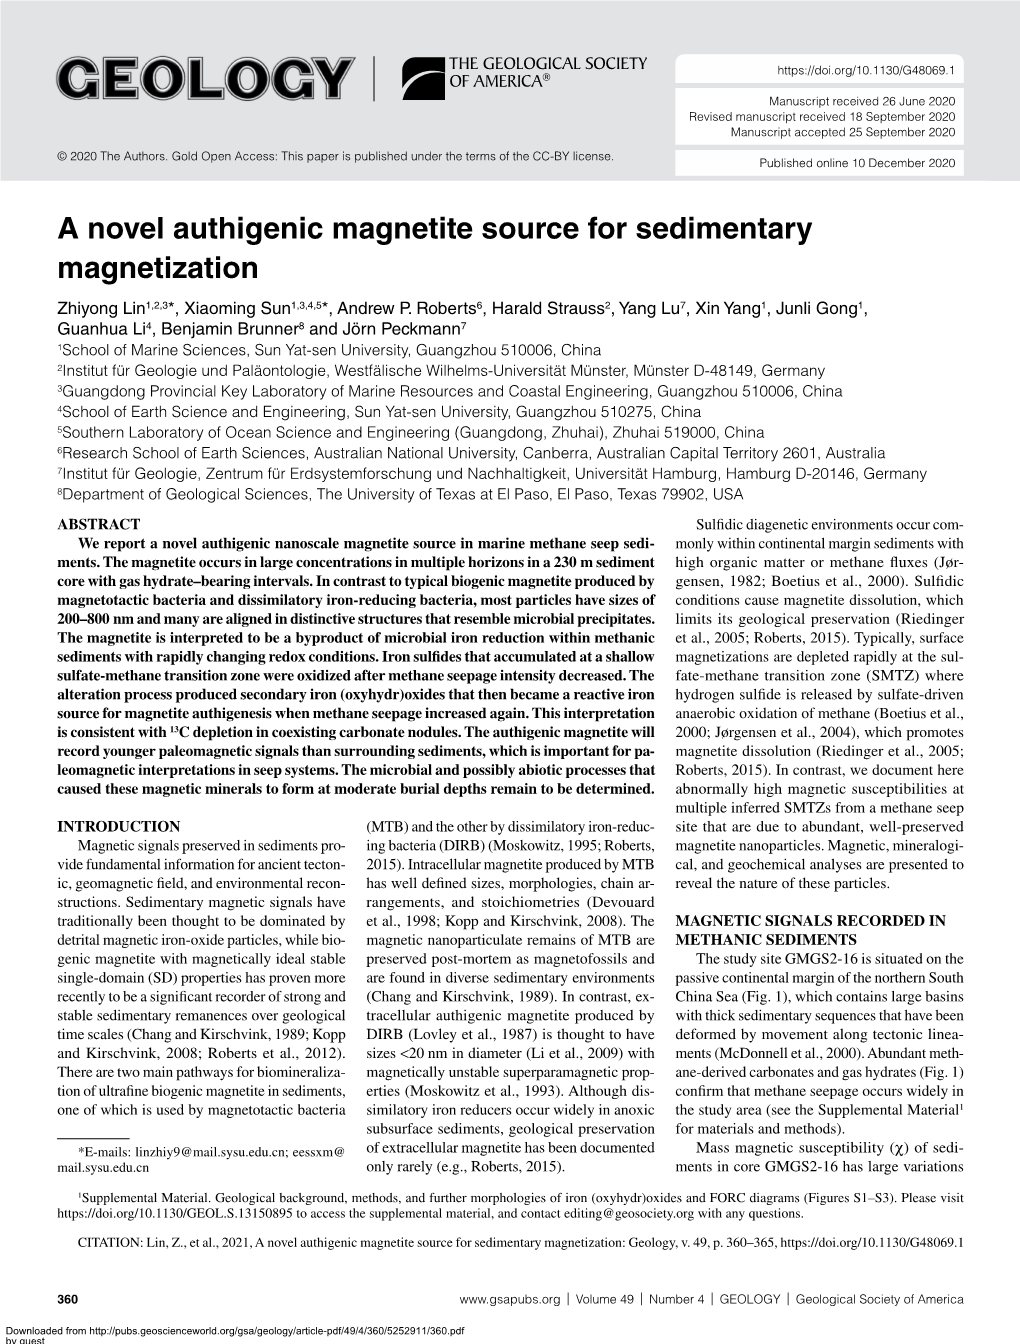 A Novel Authigenic Magnetite Source for Sedimentary Magnetization Zhiyong Lin1,2,3*, Xiaoming Sun1,3,4,5*, Andrew P